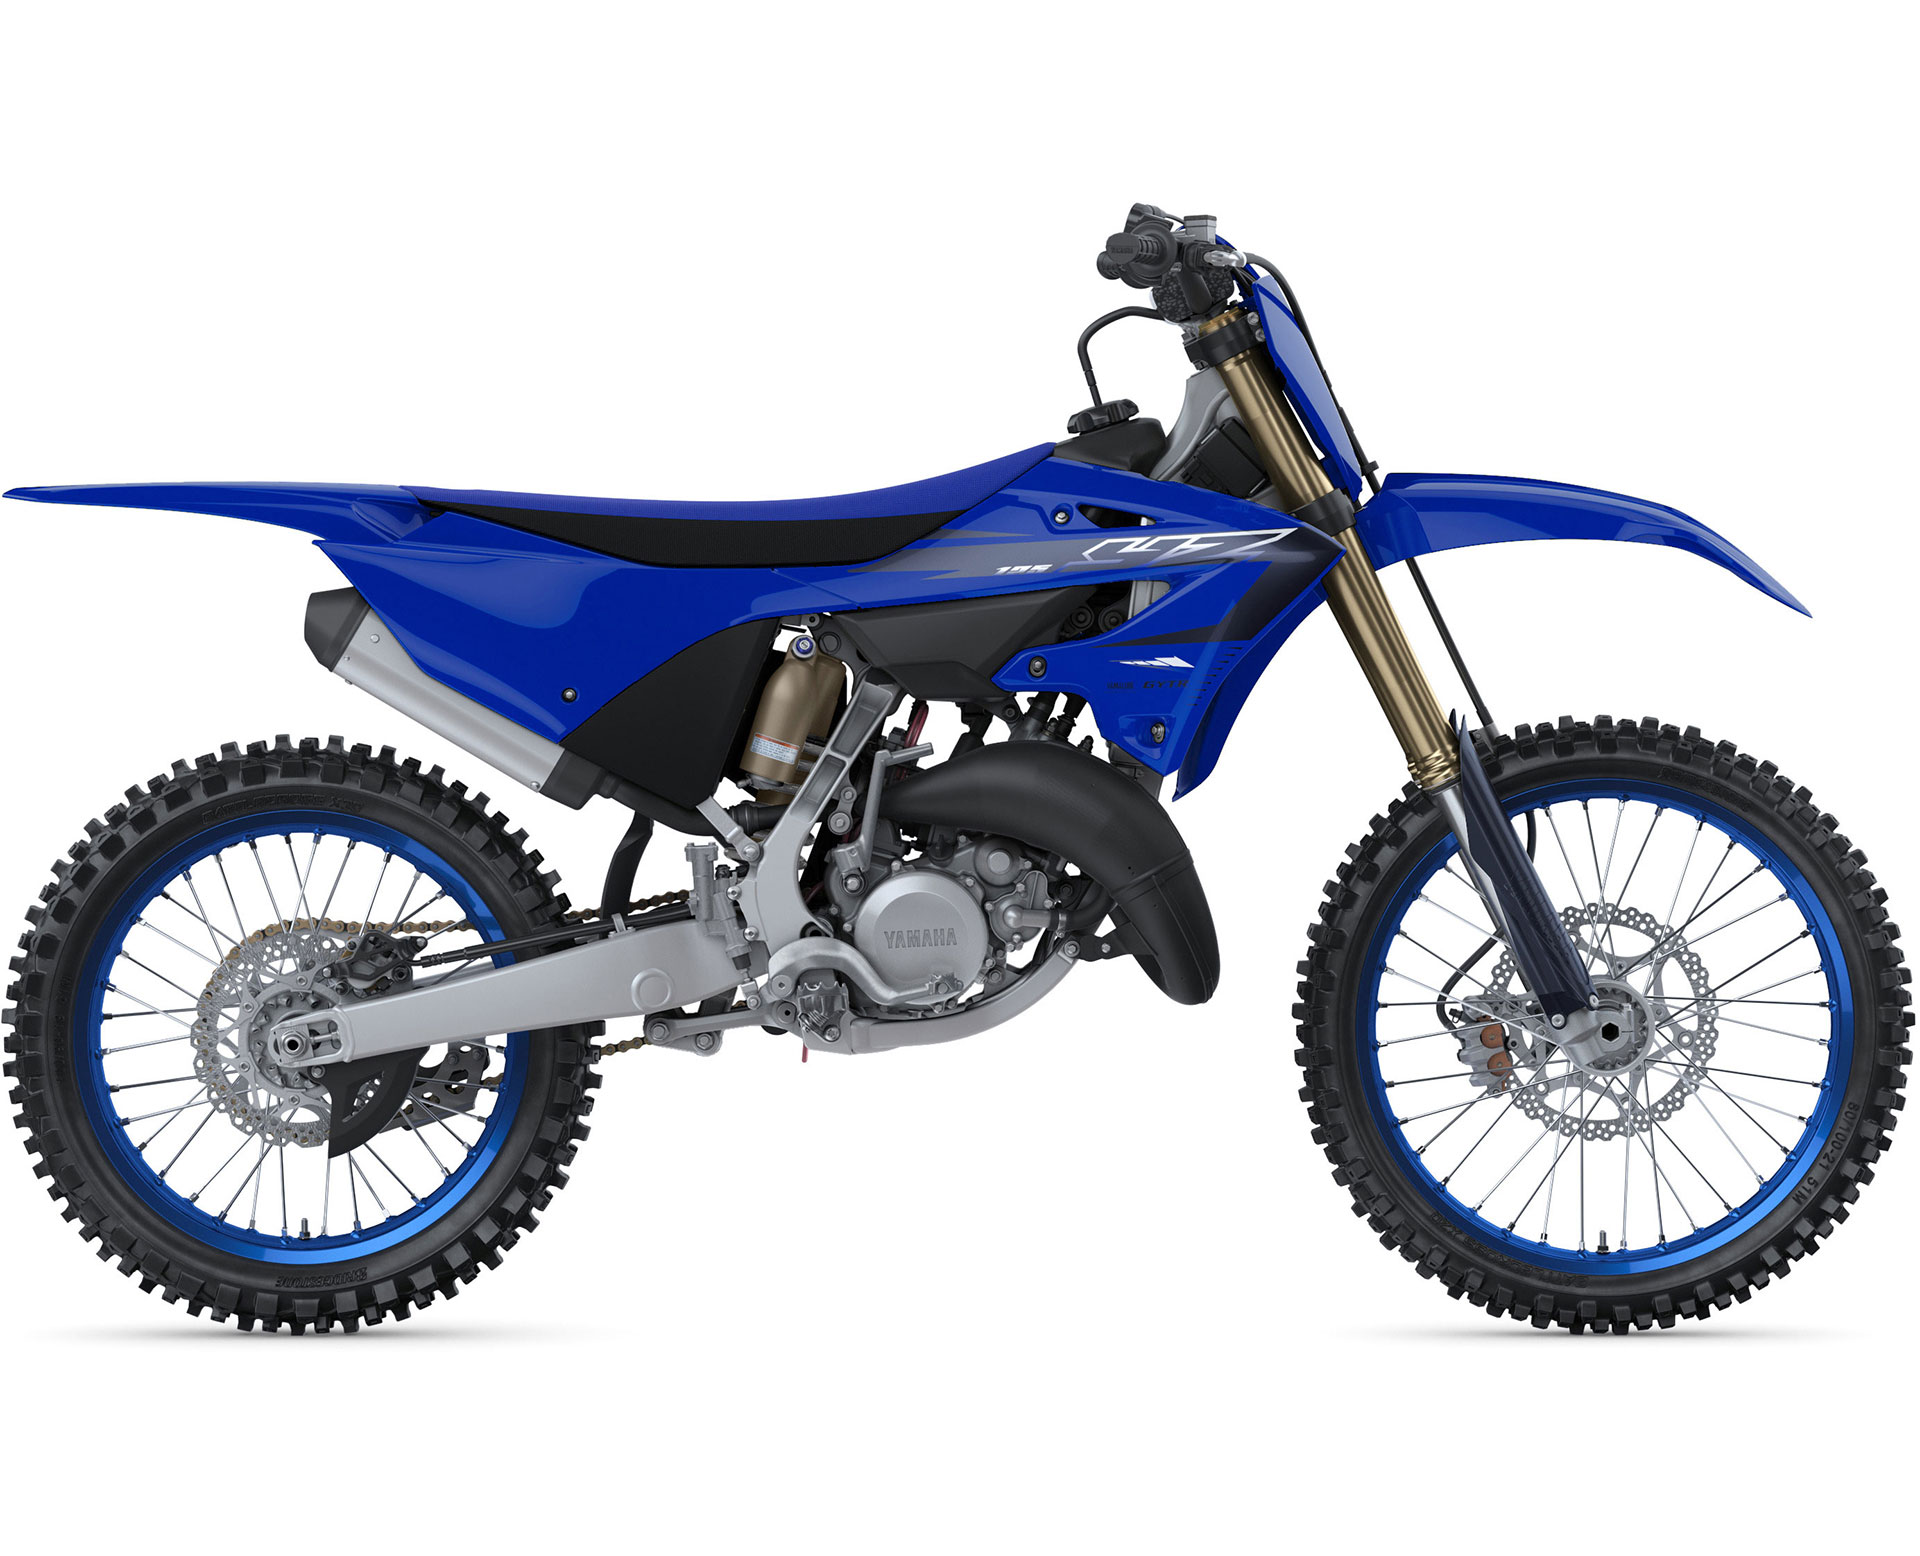 Thumbnail of your customized YZ125 2023